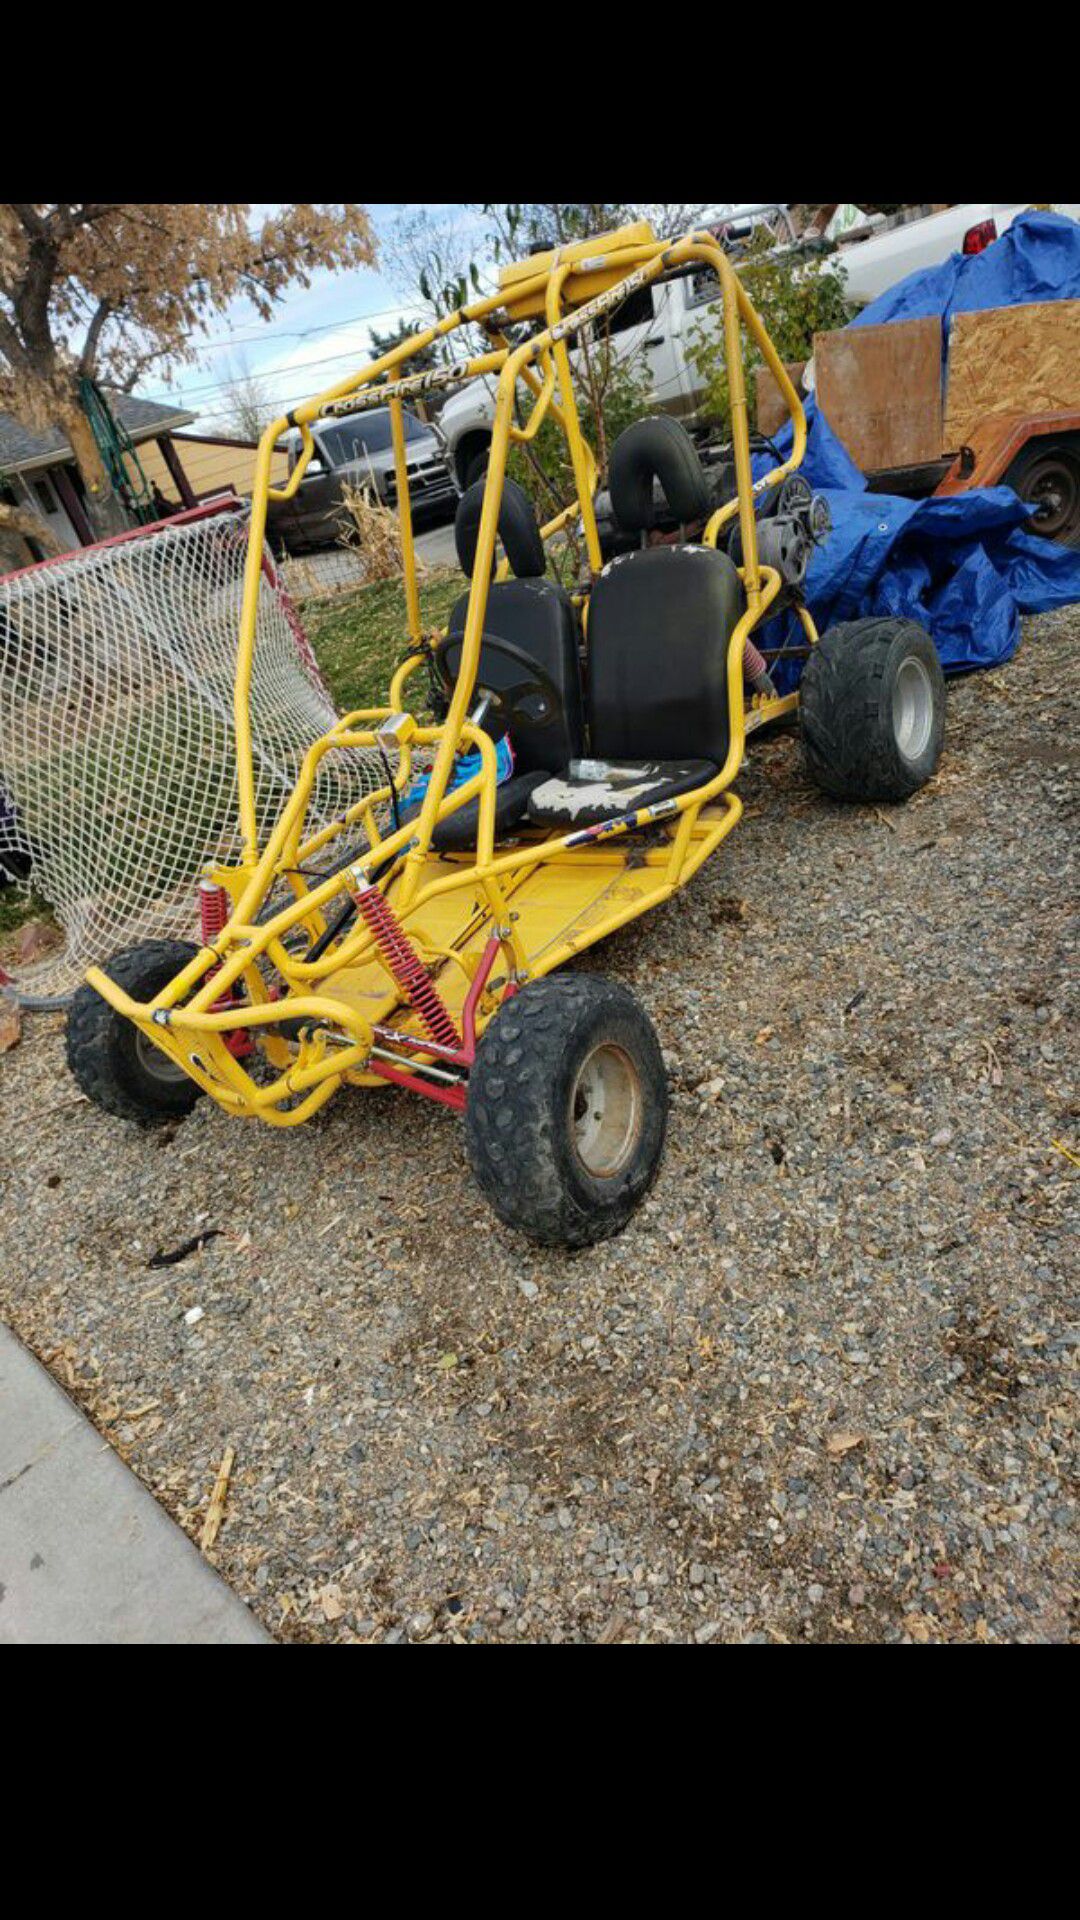 dune buggy 2 seater sale